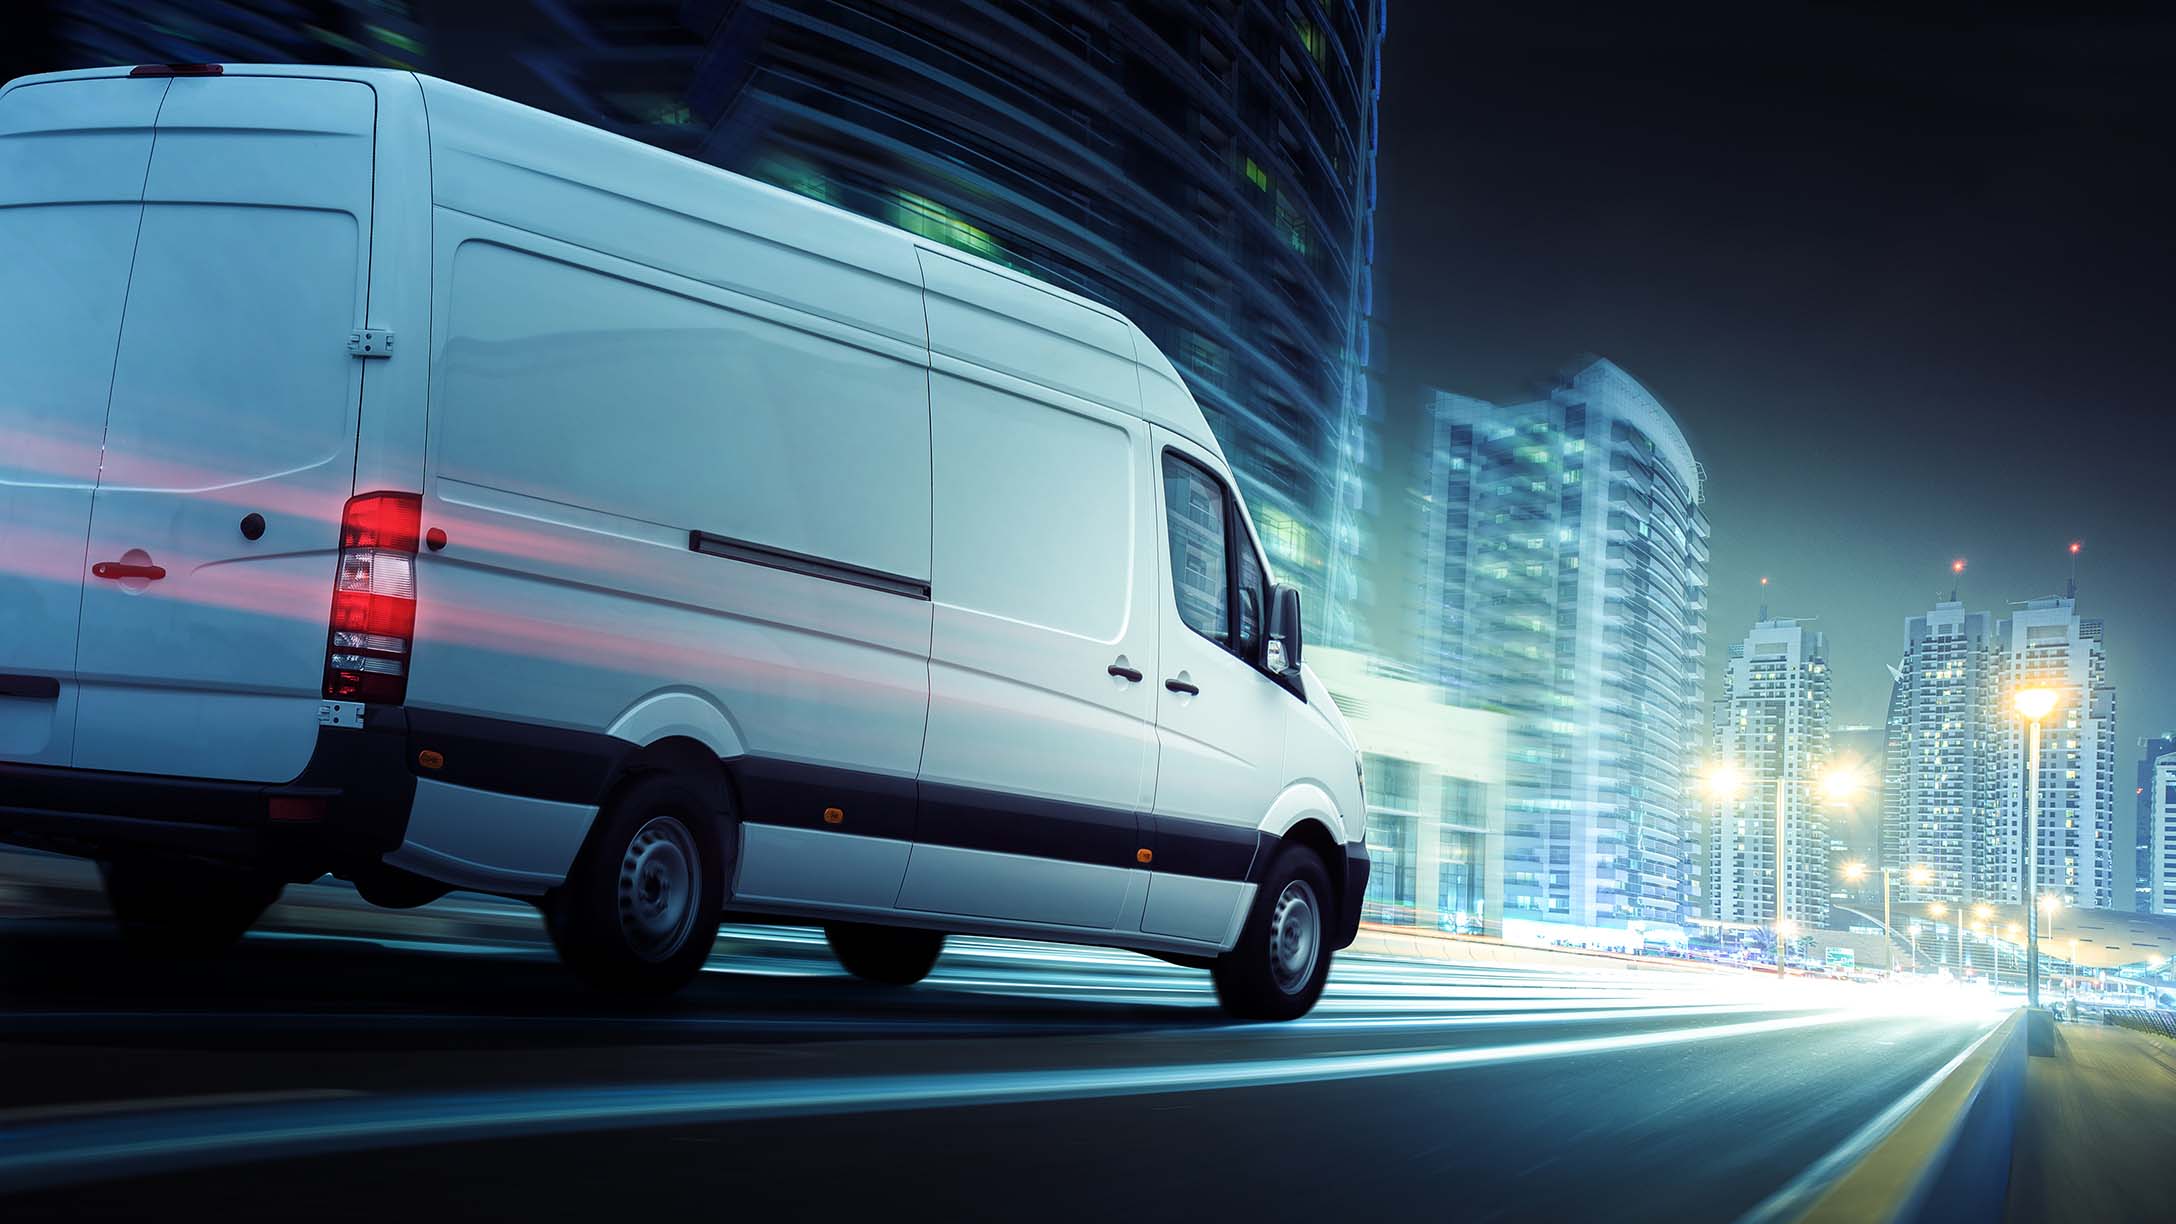 Image of a white van driving at night on a city road